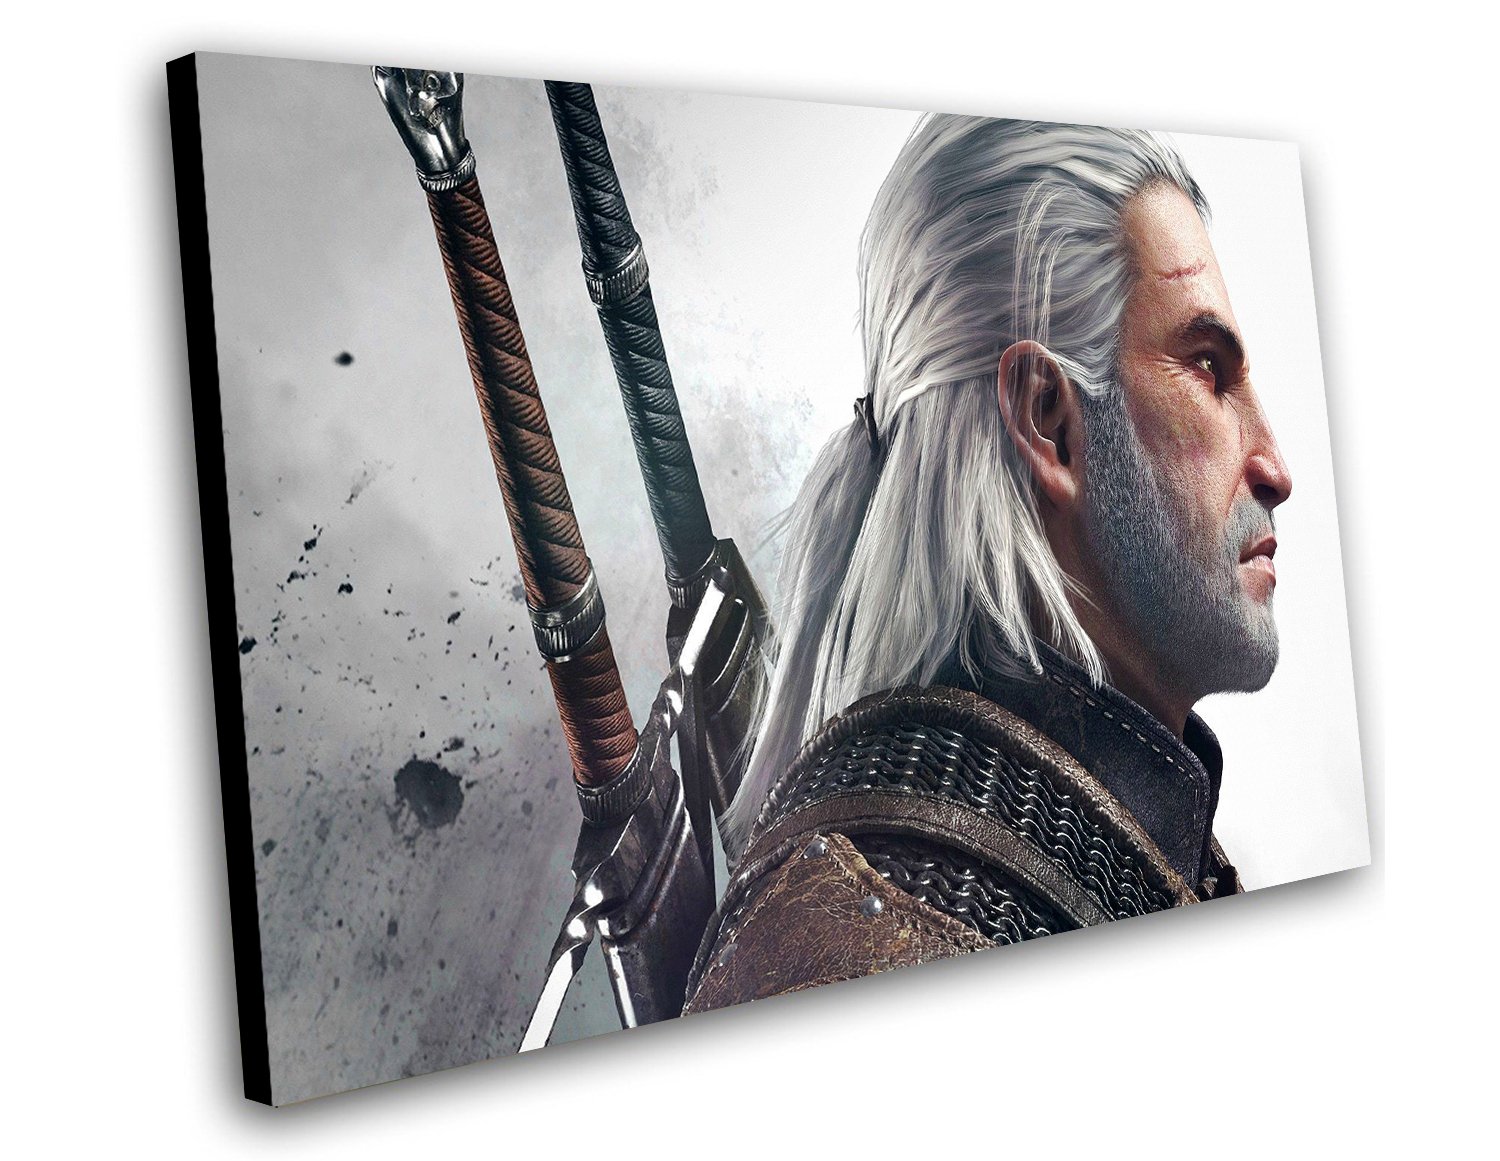 The Witcher 3 Wild Hunt Hearts of Stone Game 8"x12" (20cm/30cm) Canvas Print